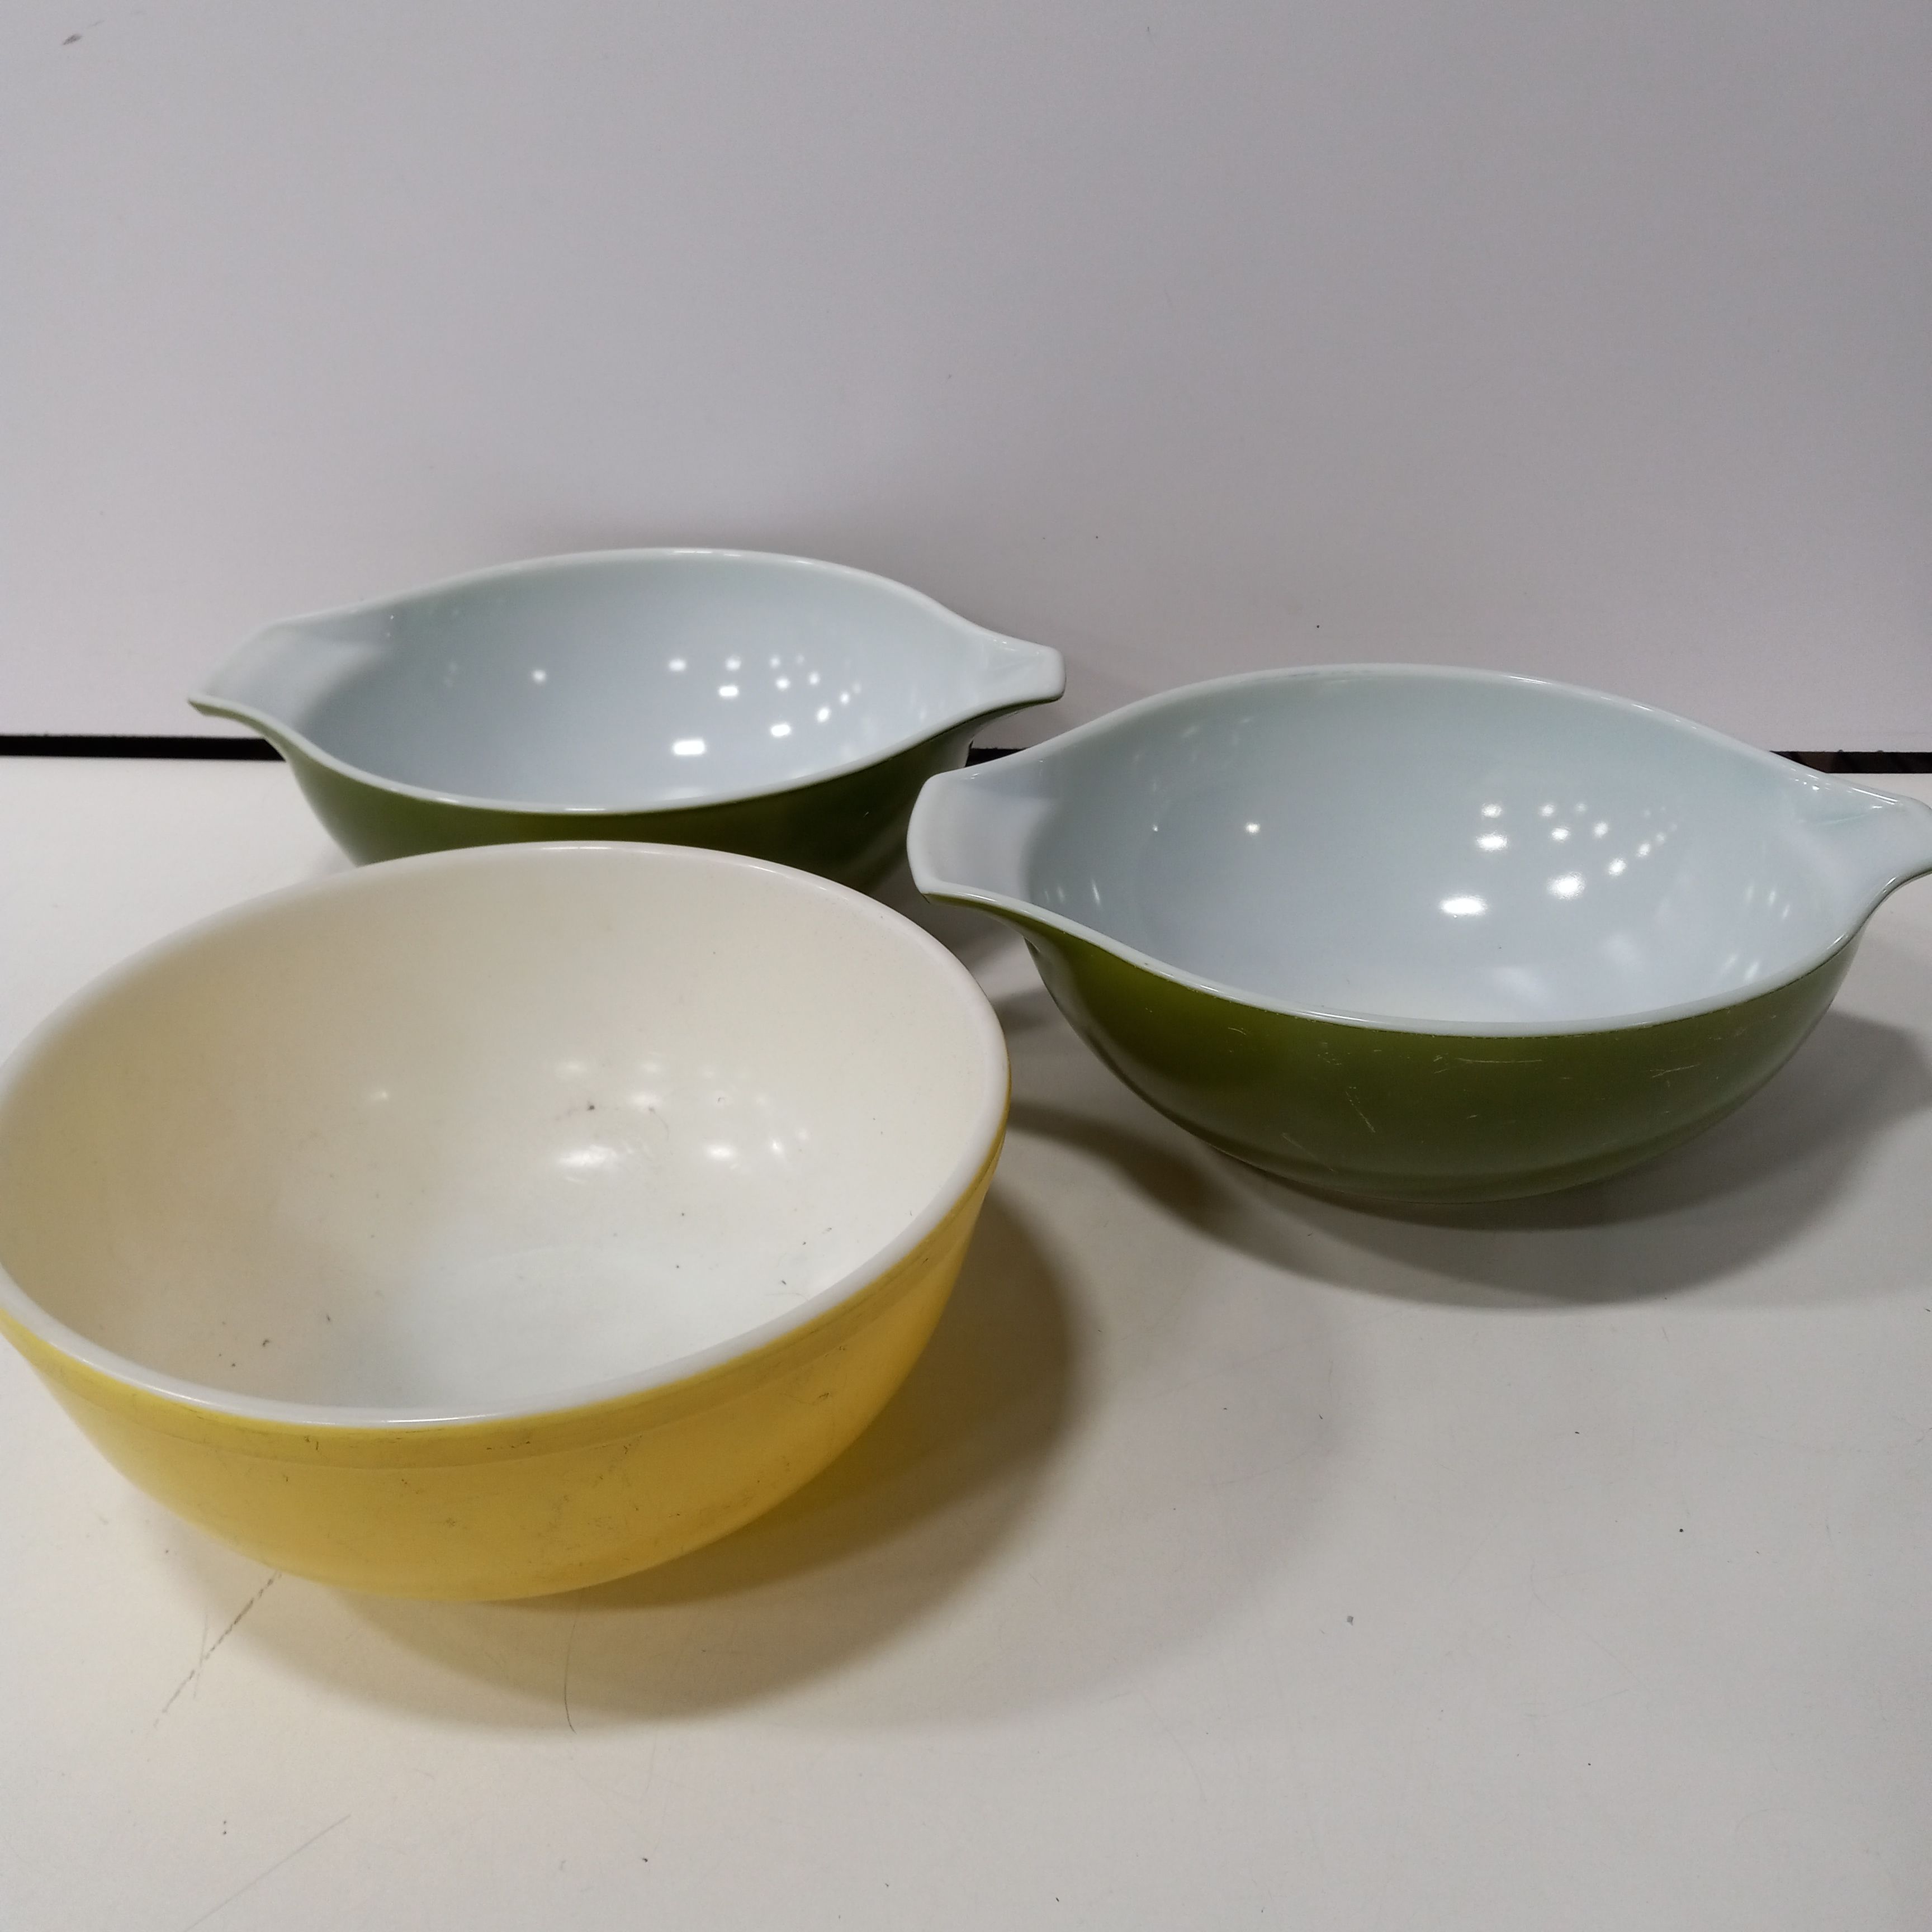 Buy the 3pc. Lot of Multi-Color Milk Glass Pyrex Mixing Bowls